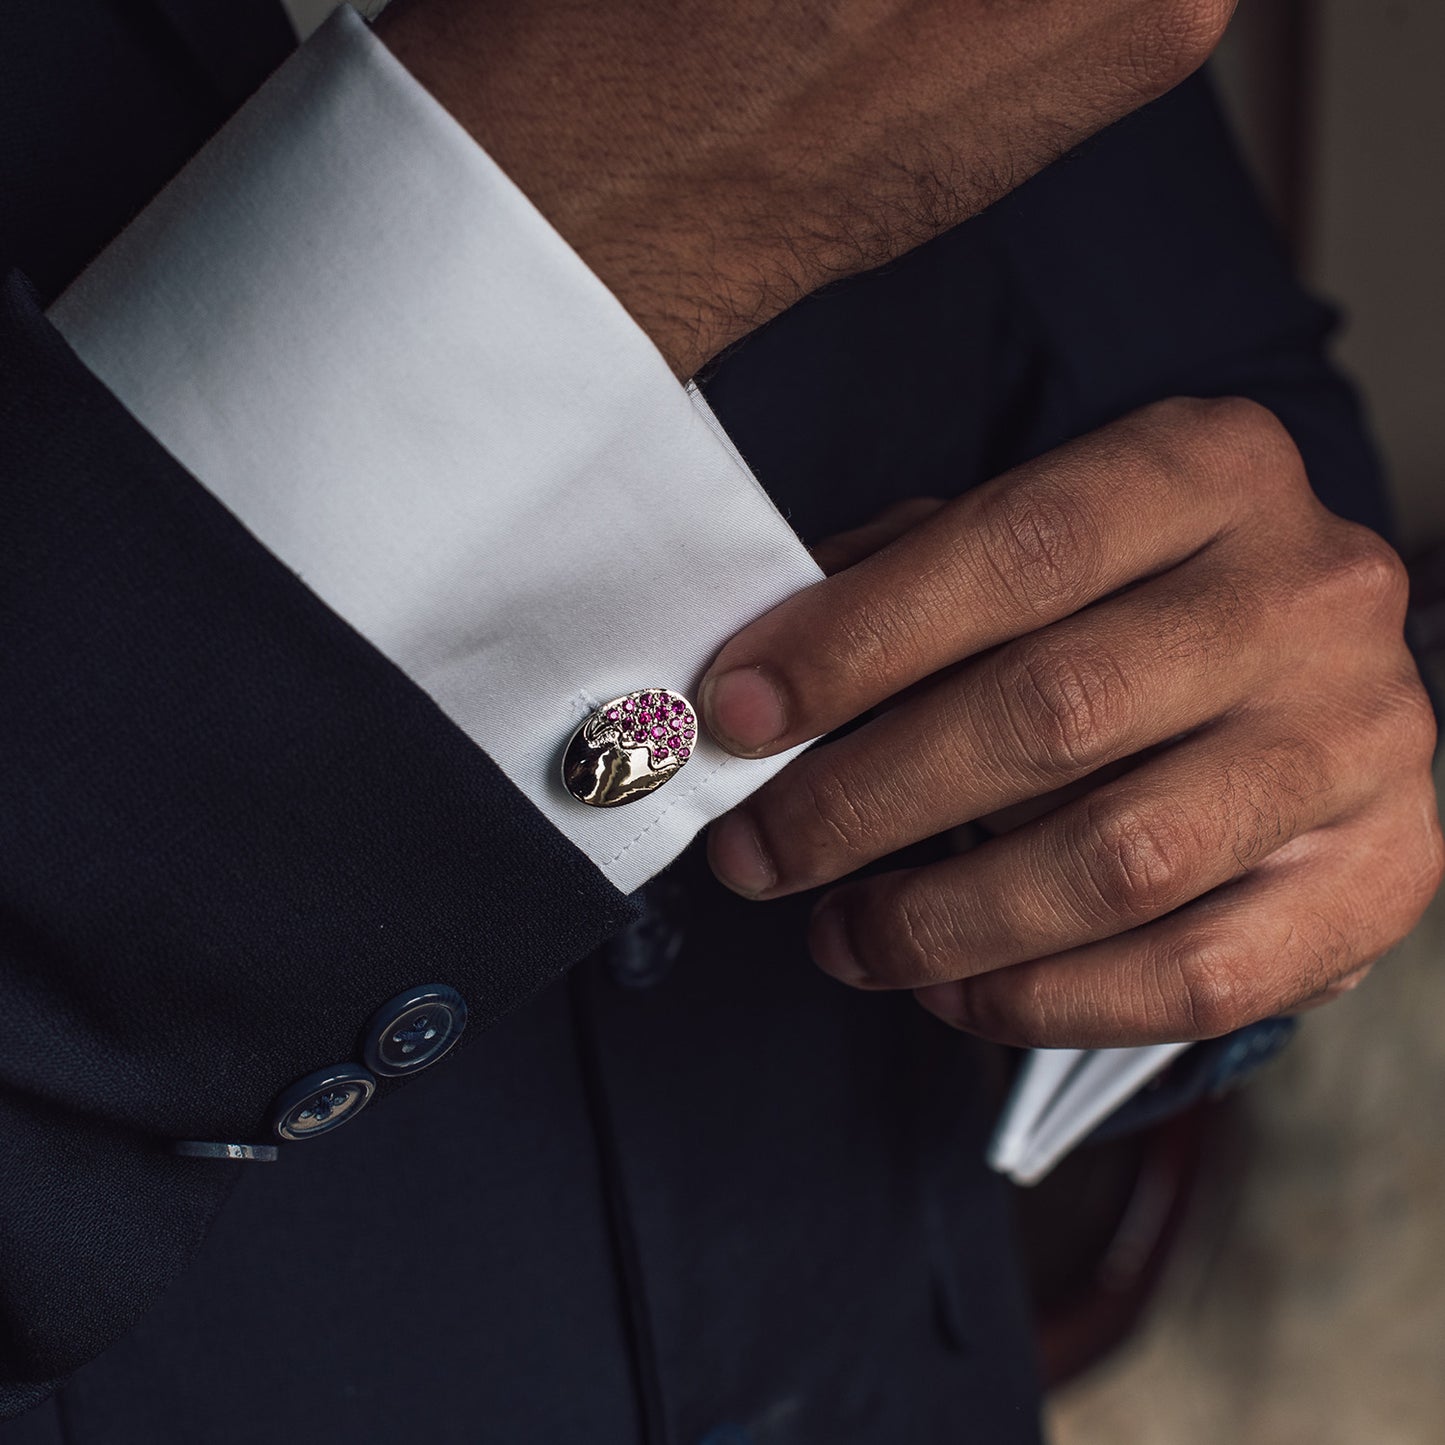 Cufflinks for Men Formal Business or Wedding Shirts Cufflinks For Men With Synthetic Ruby To Enhance The Overall Look